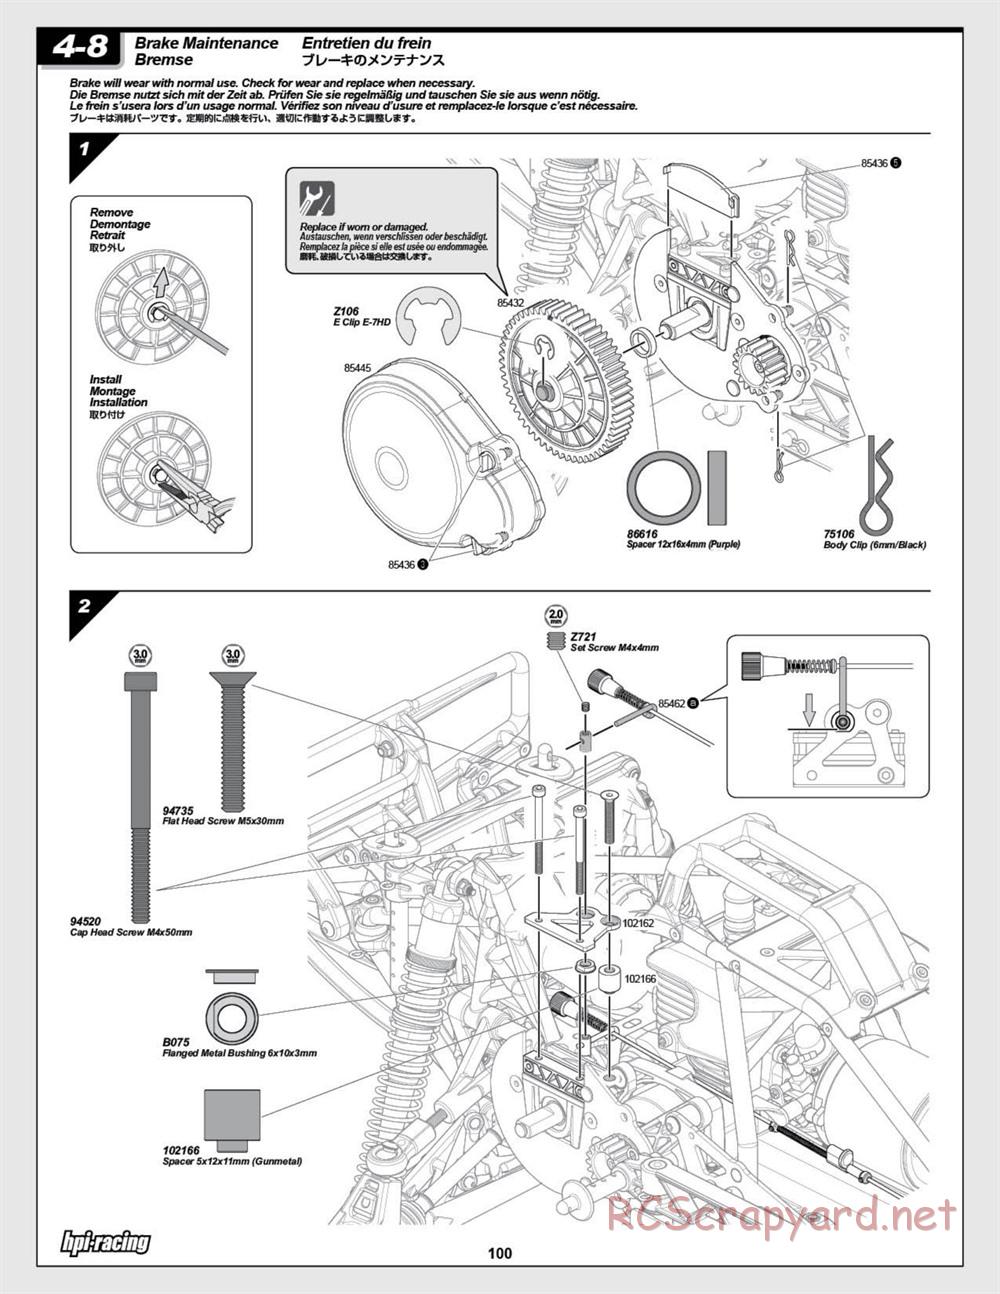 HPI - Baja 5SC SS - Exploded View - Page 100